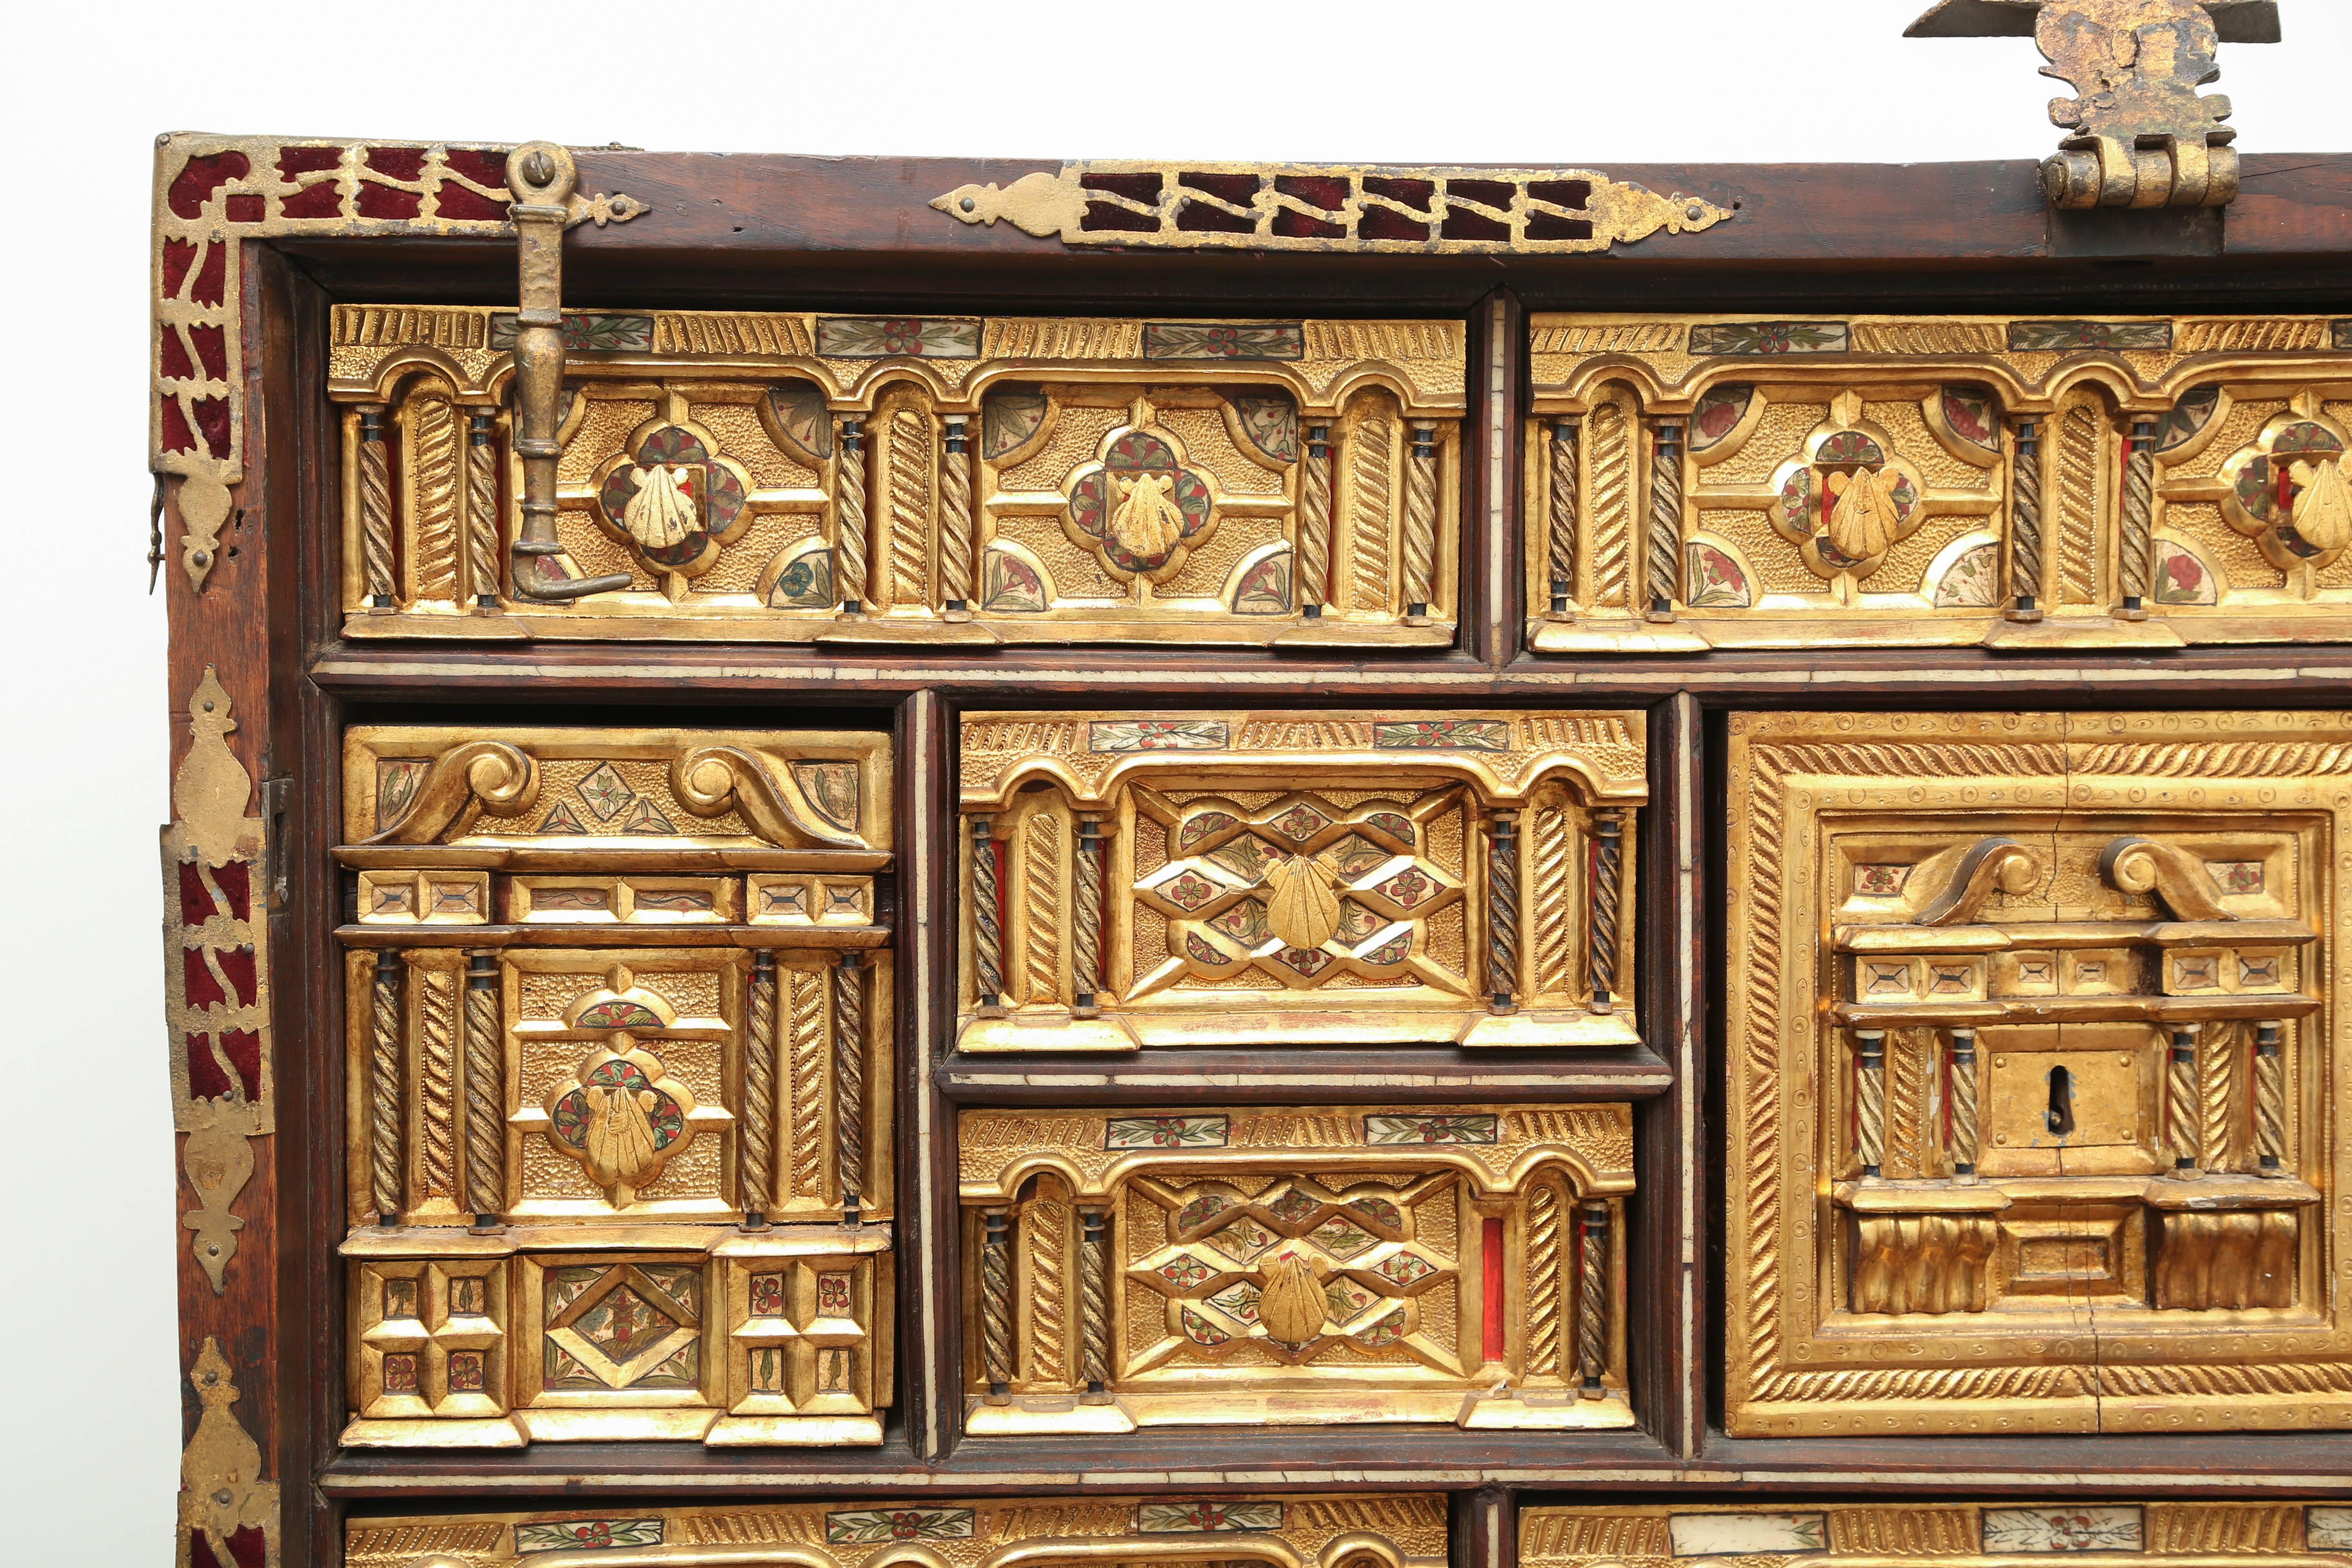 Impressive and rare 17th century giltwood Spanish vargueno with multiple drawers including two hidden behind the door in the center of the cabinet. Each drawer has a gilt bronze clamshell pull. Inlaid polychromed bone decorates each drawer which